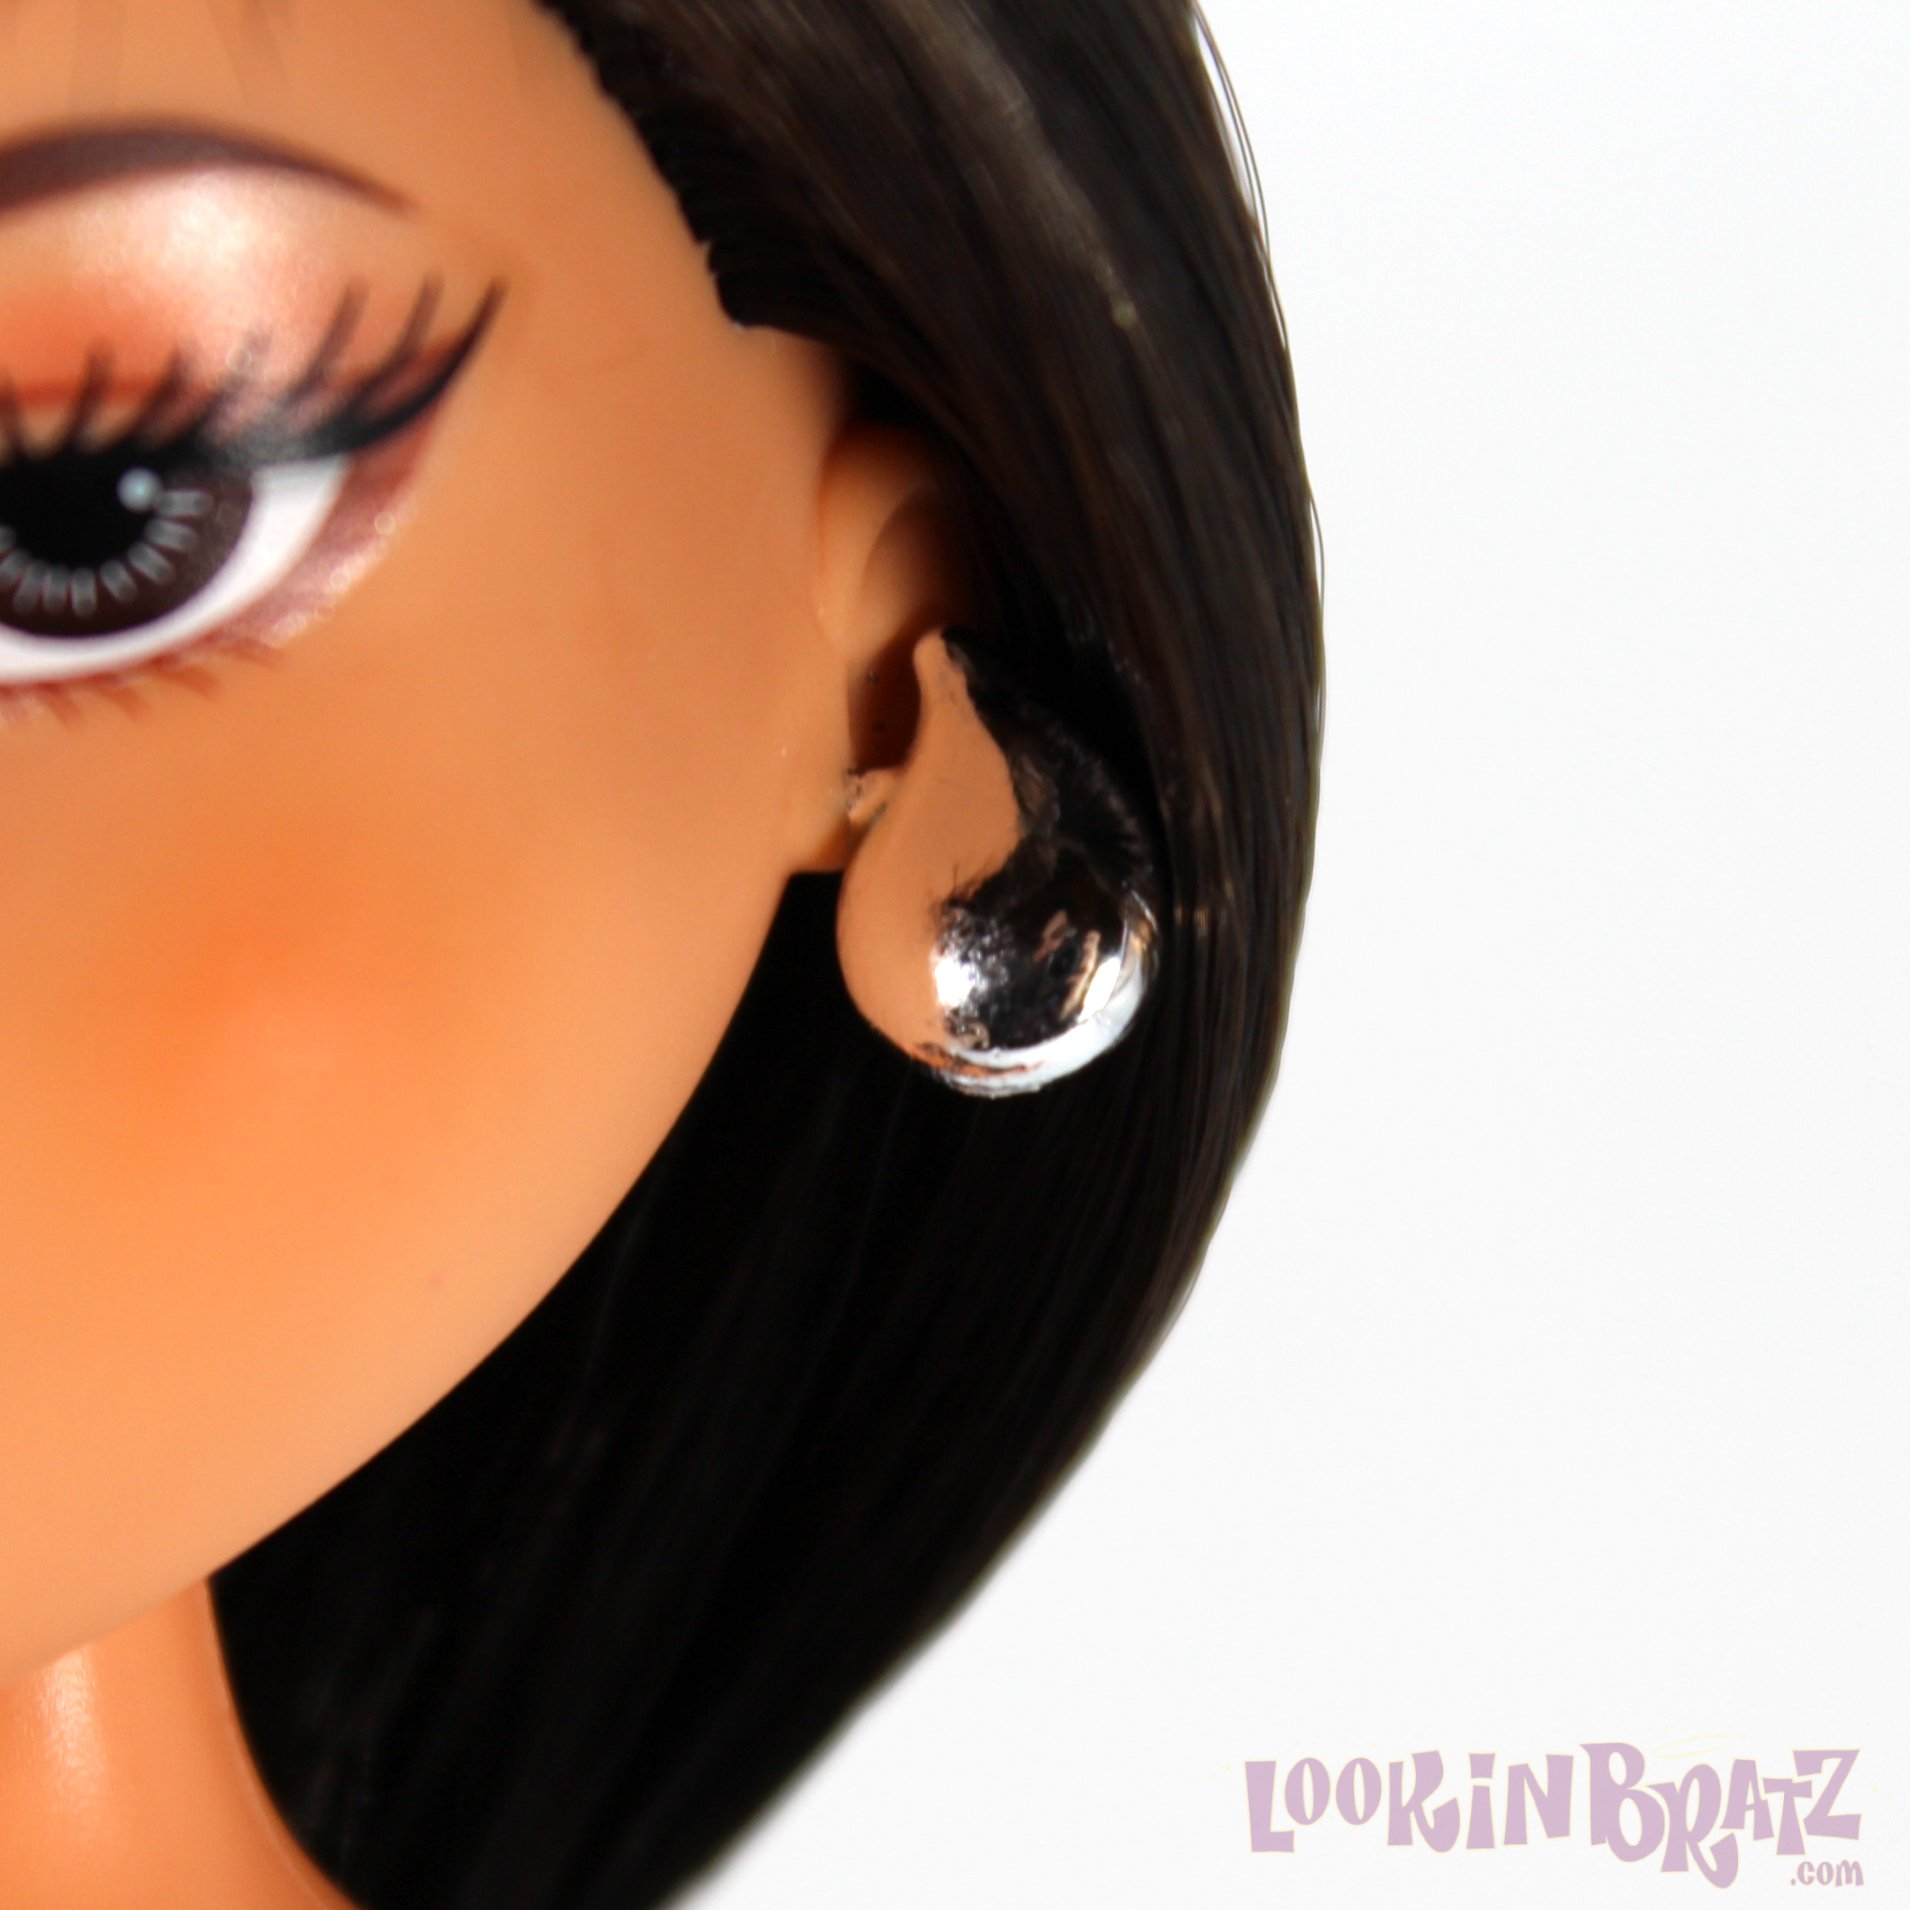 Bratz x Kylie Jenner Day Doll Earrings Close-Up